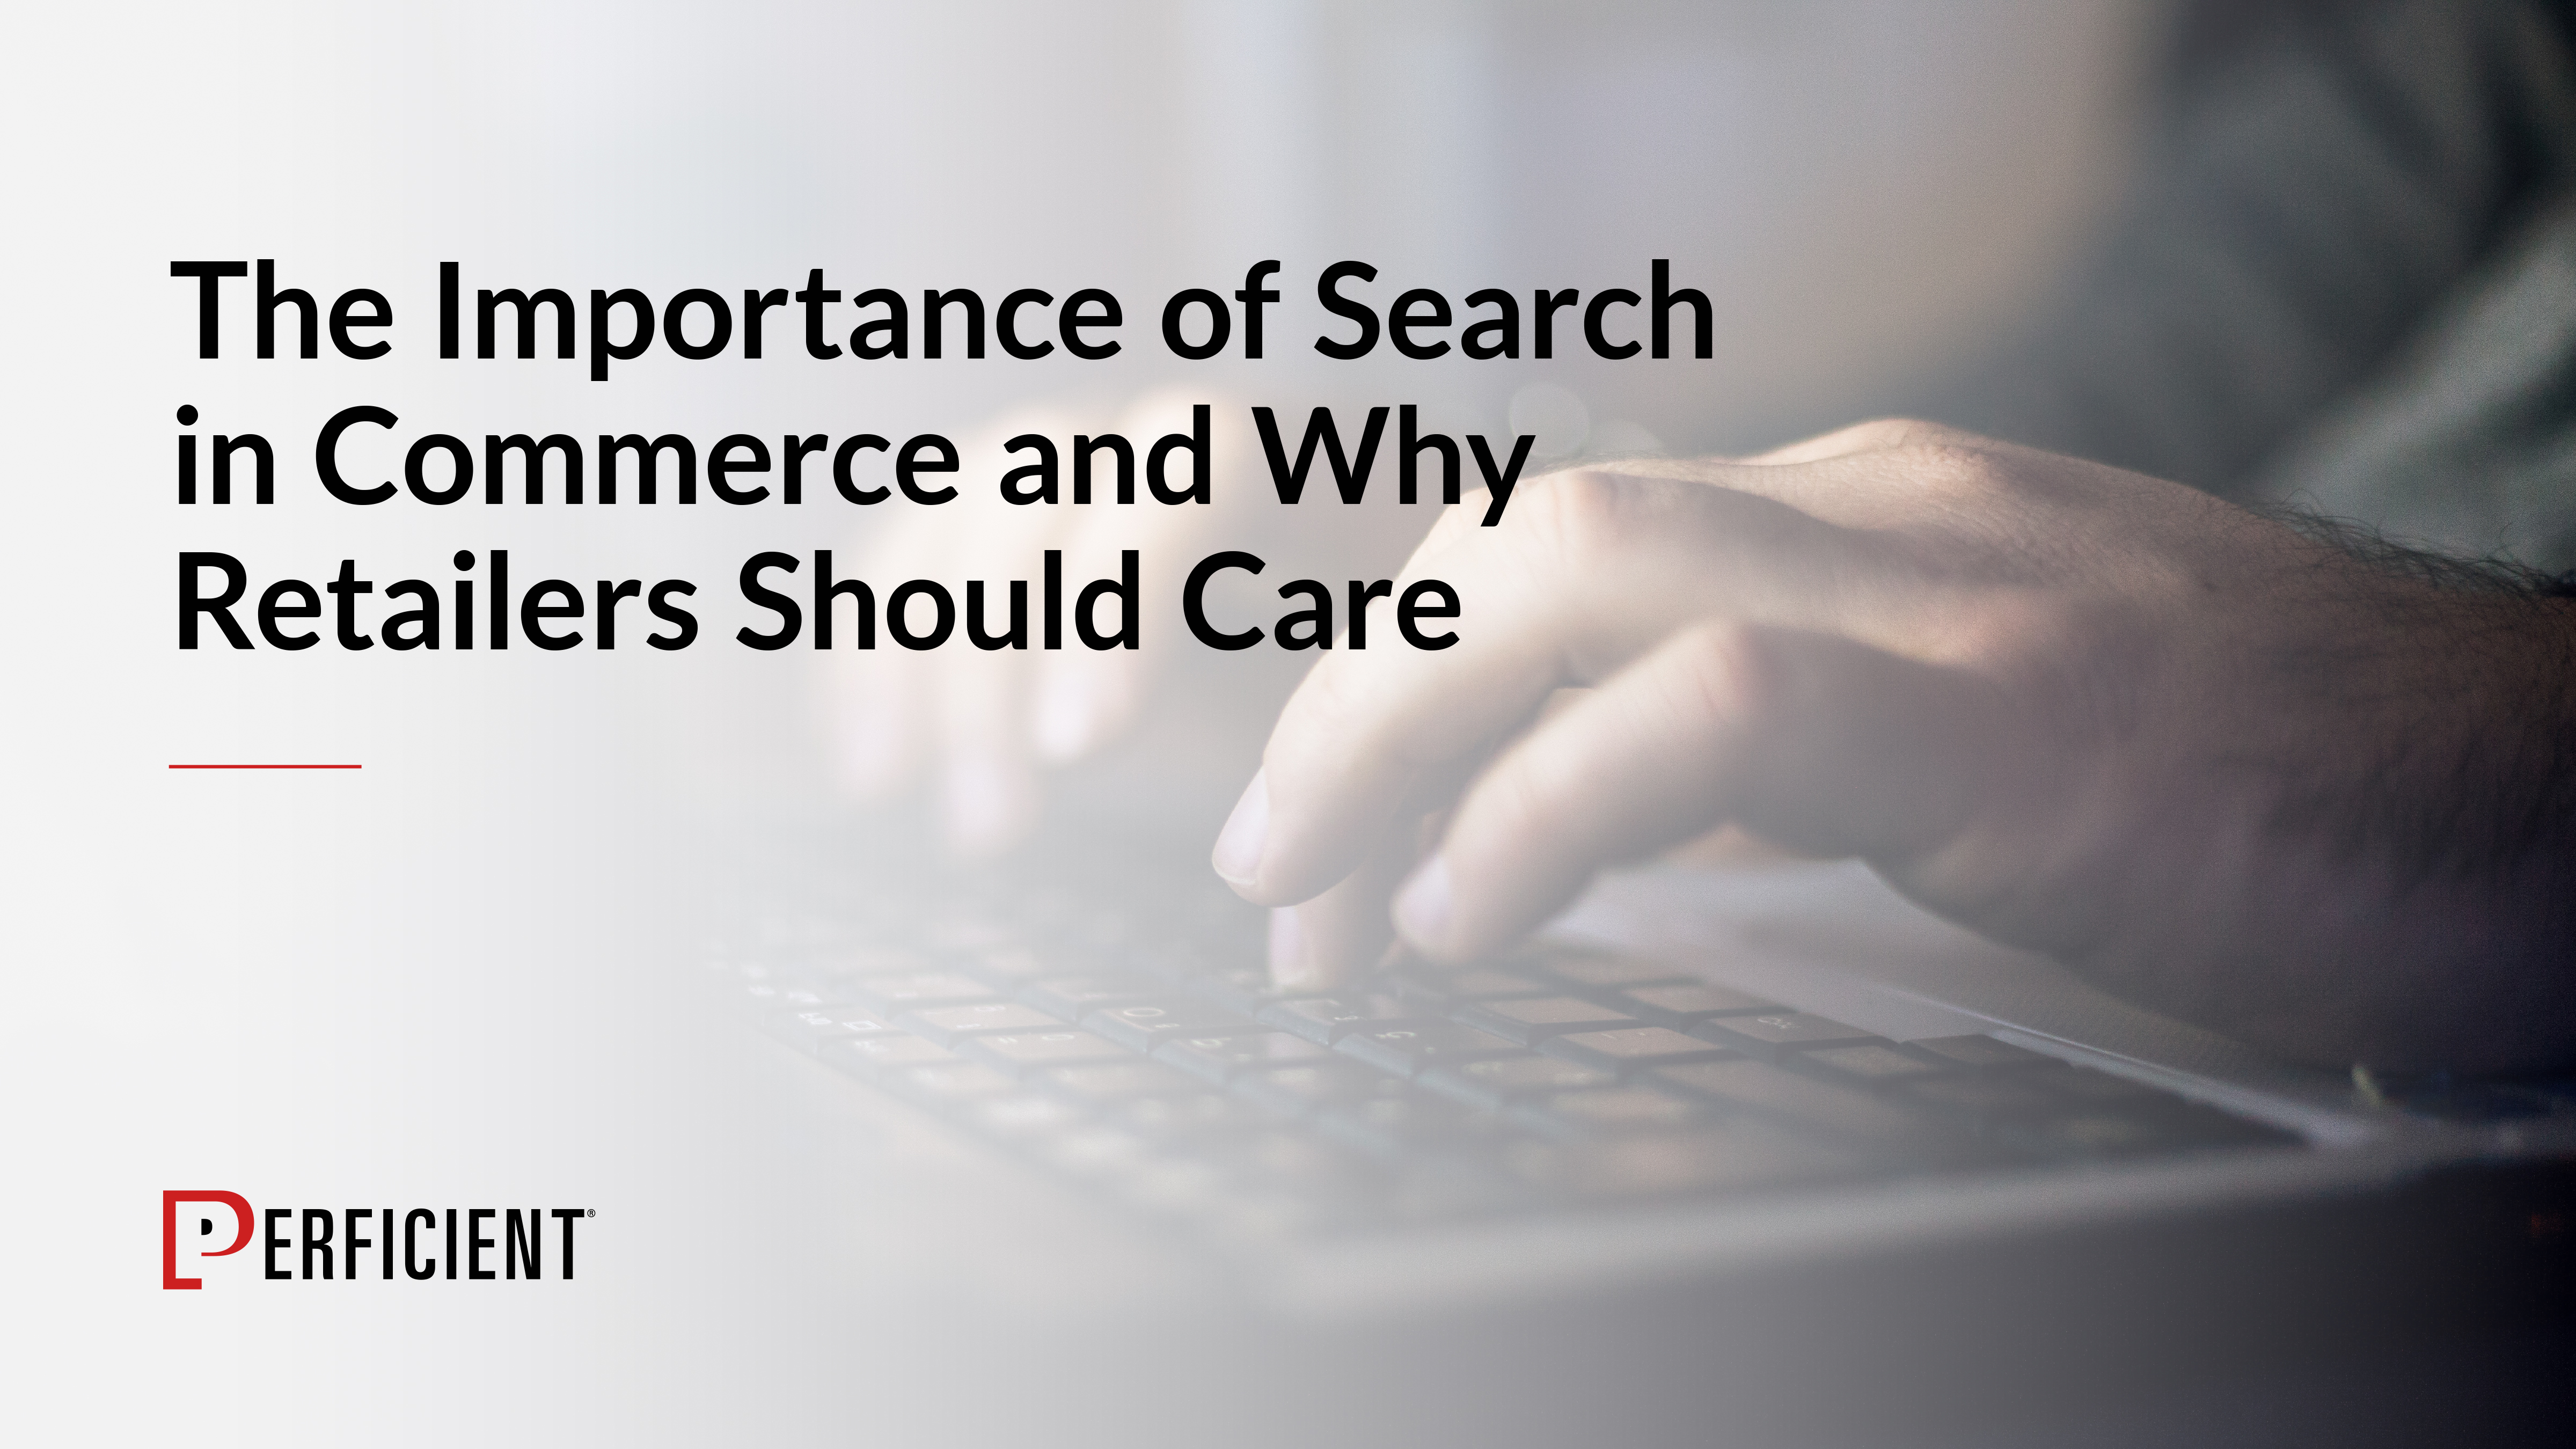 The Importance of Search in Commerce and Why Retailers Should Care